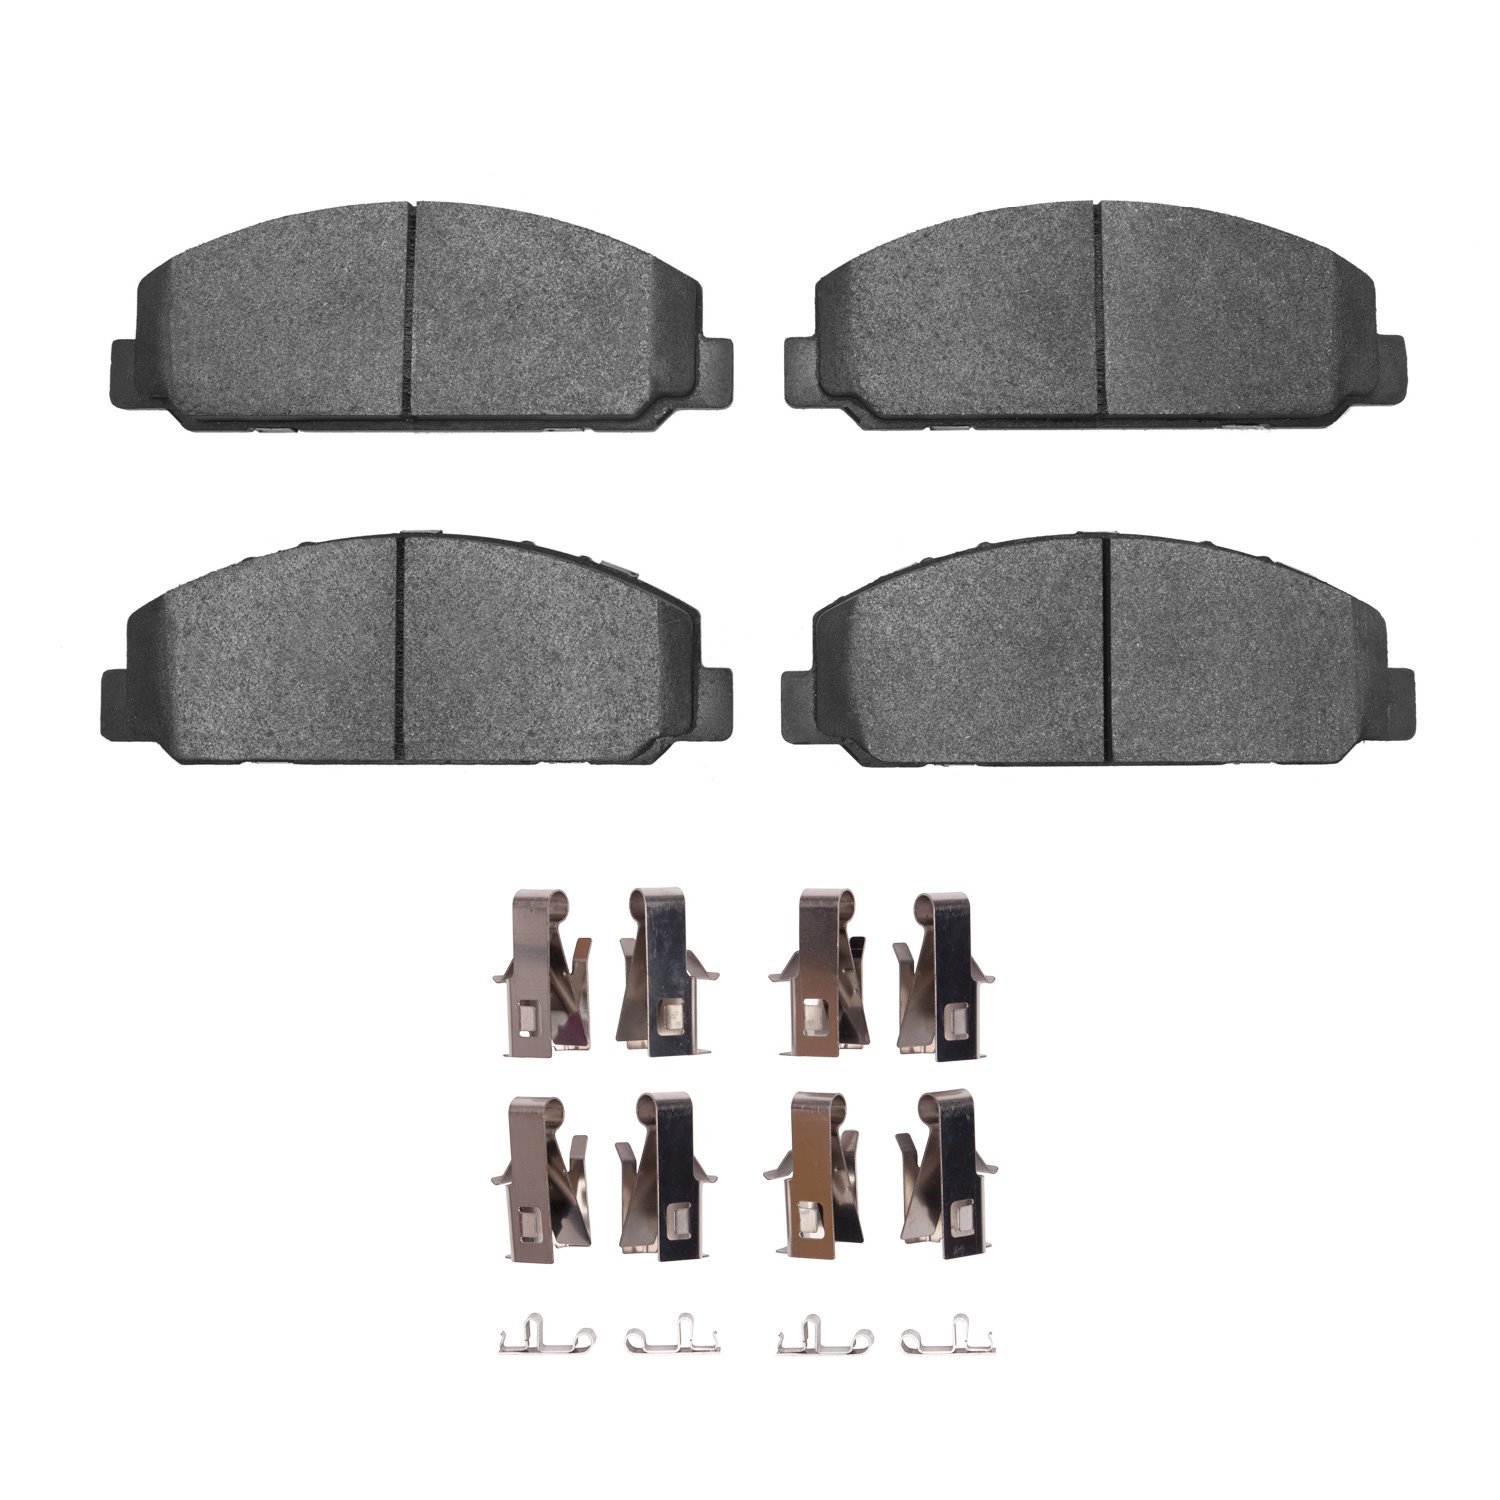 1214-0827-01 Heavy-Duty Brake Pads & Hardware Kit, Fits Select GM, Position: Front,Fr,Rr